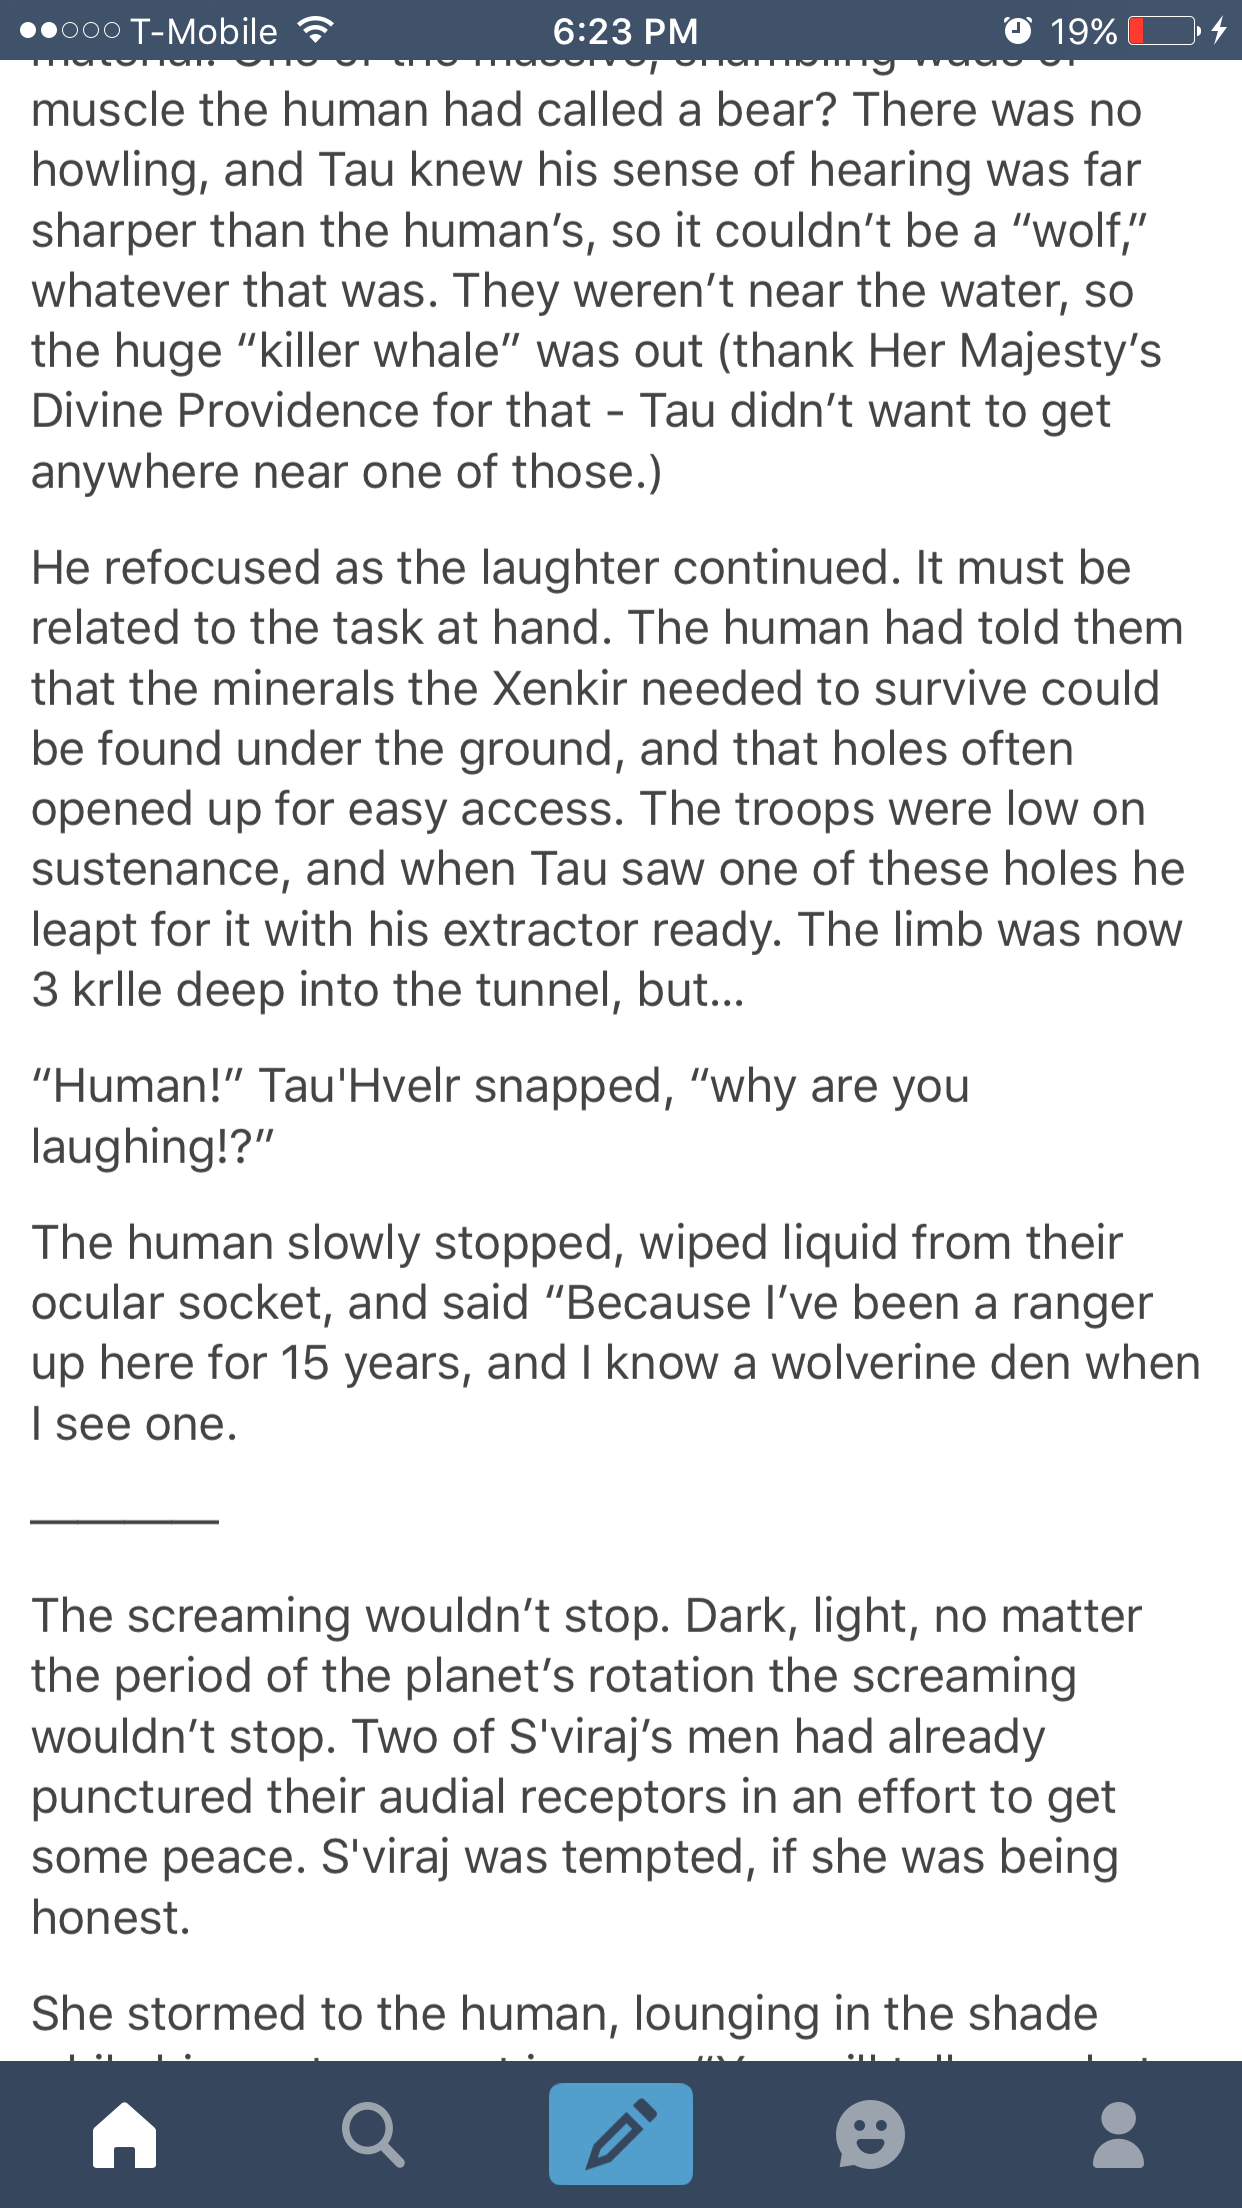 tumblr - screenshot - vo .000 TMobile 19% O4 mover our unvorvoor muscle the human had called a bear? There was no howling, and Tau knew his sense of hearing was far sharper than the human's, so it couldn't be a